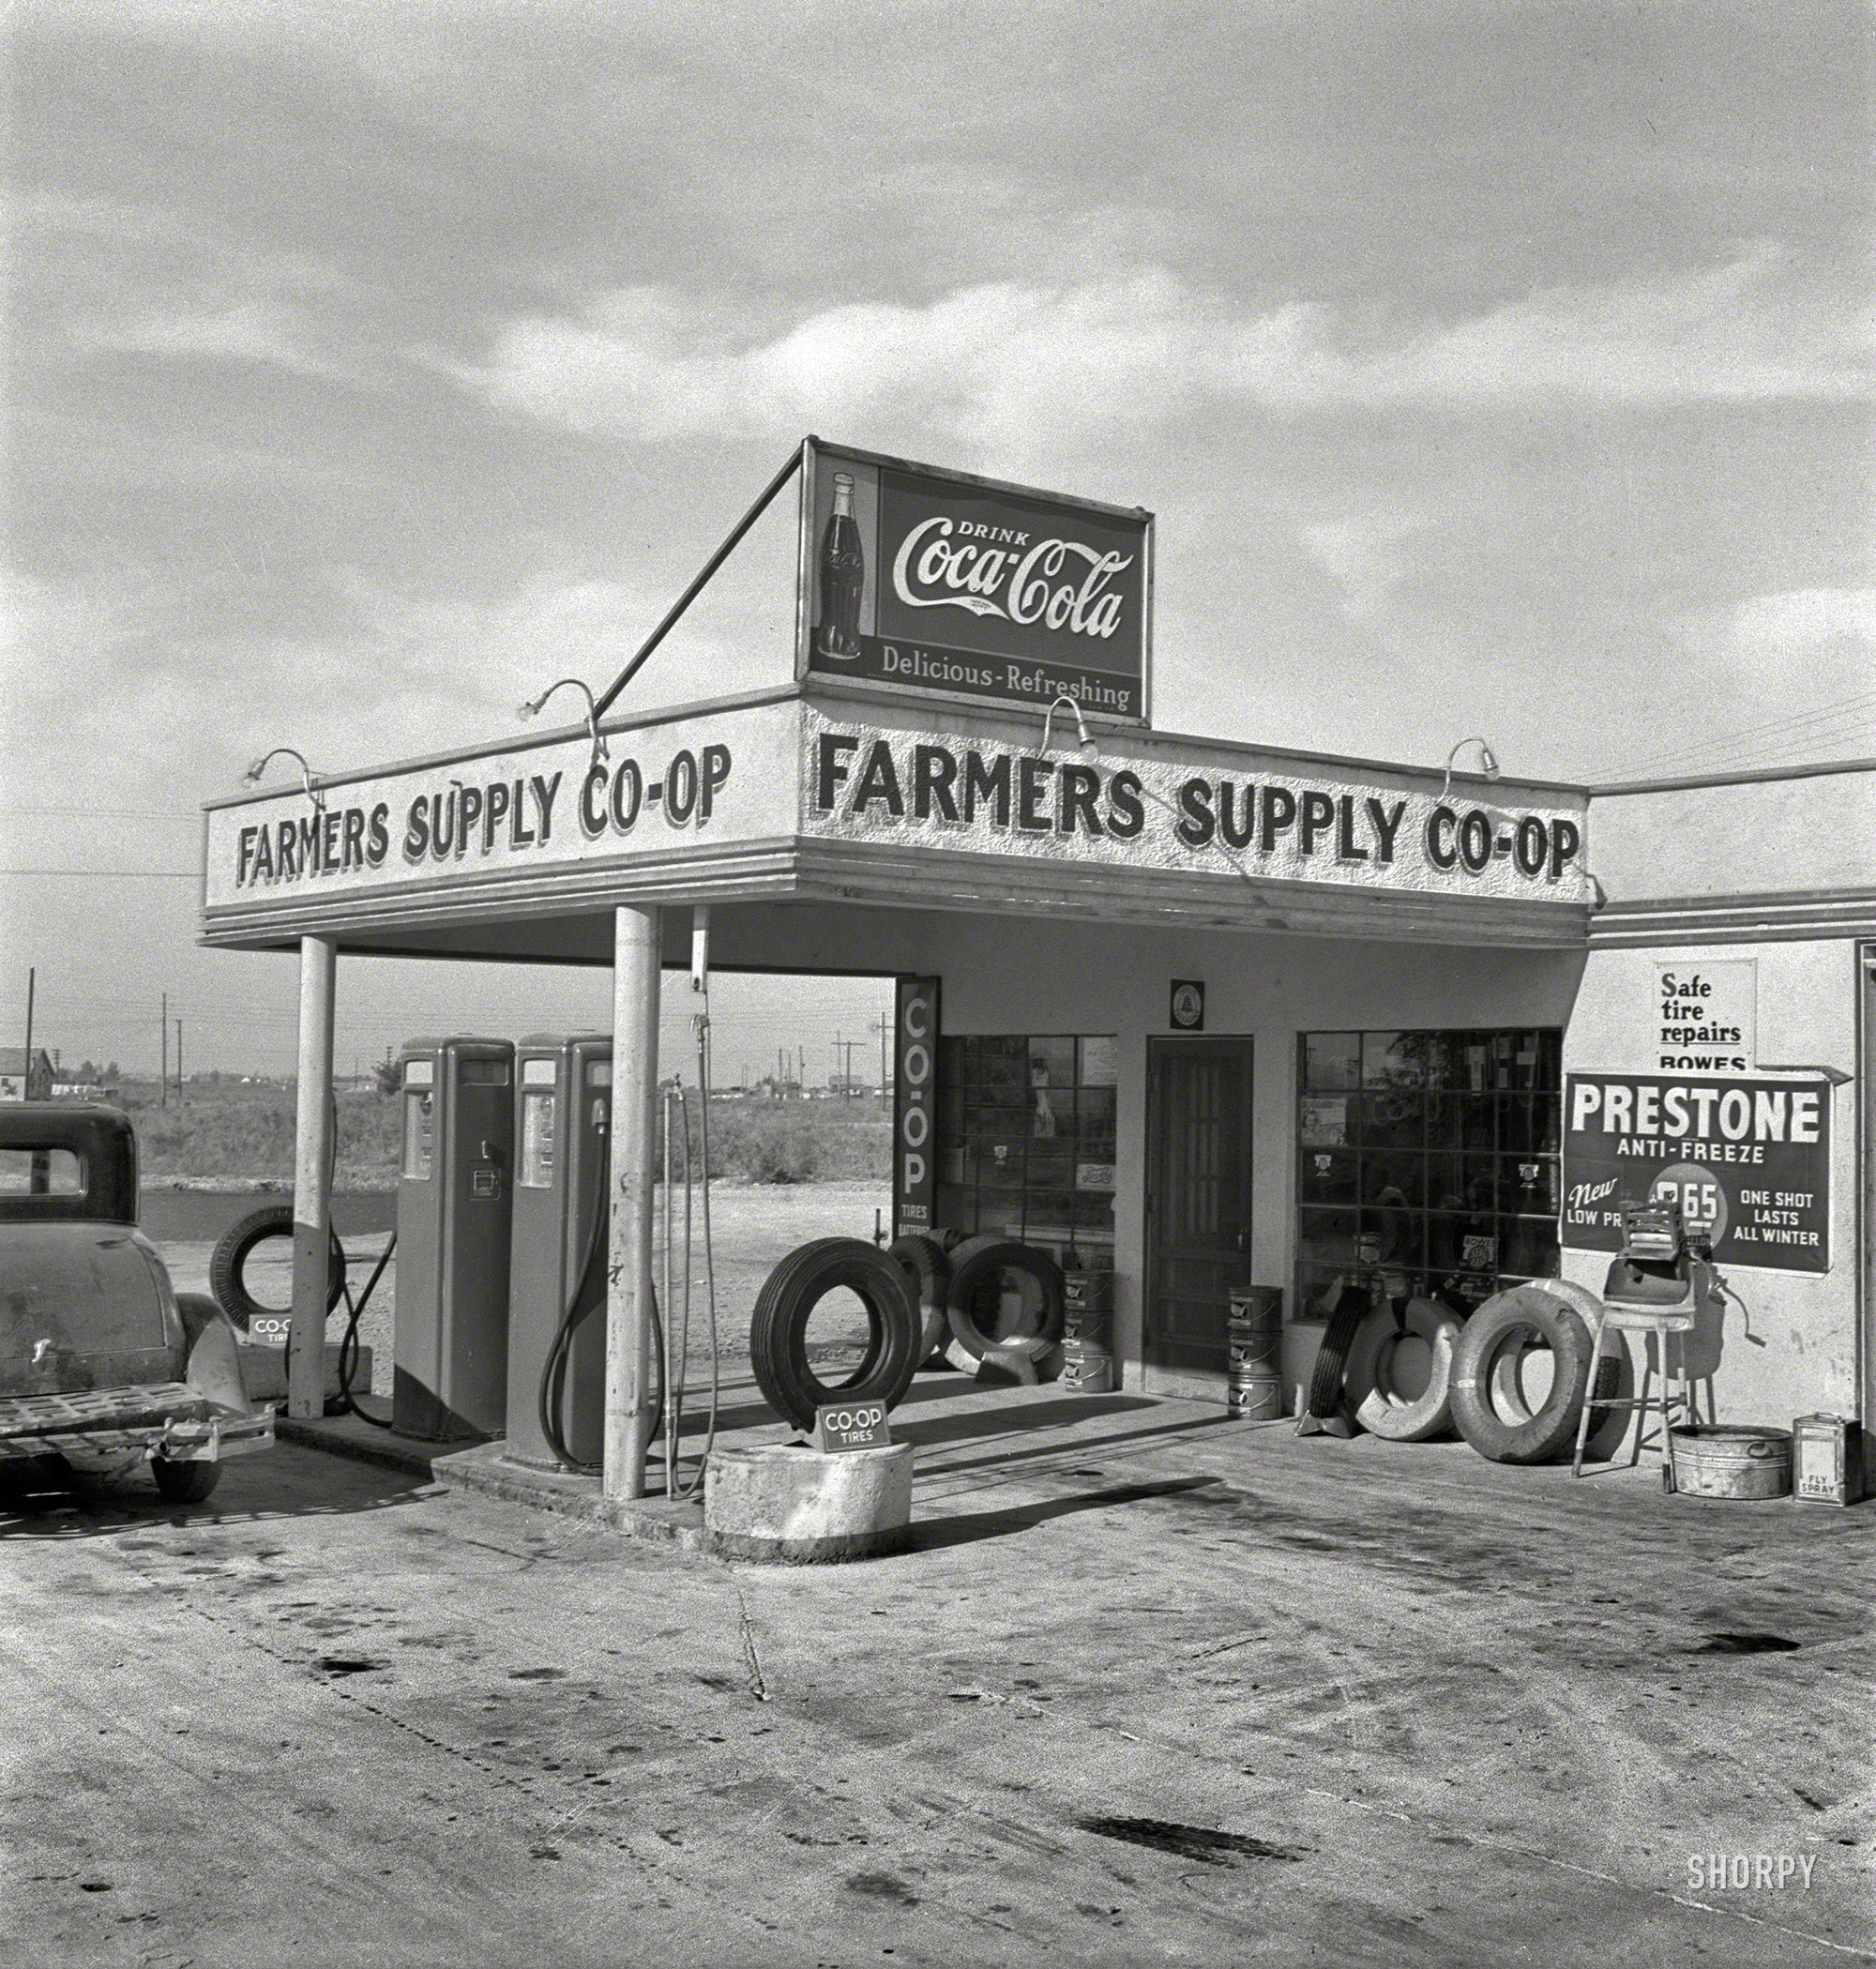 October 1939. "Farmers' supply co-op. Nyssa, Malheur County, Oregon." Photo by Dorothea Lange for the Farm Security Administration. View full size.